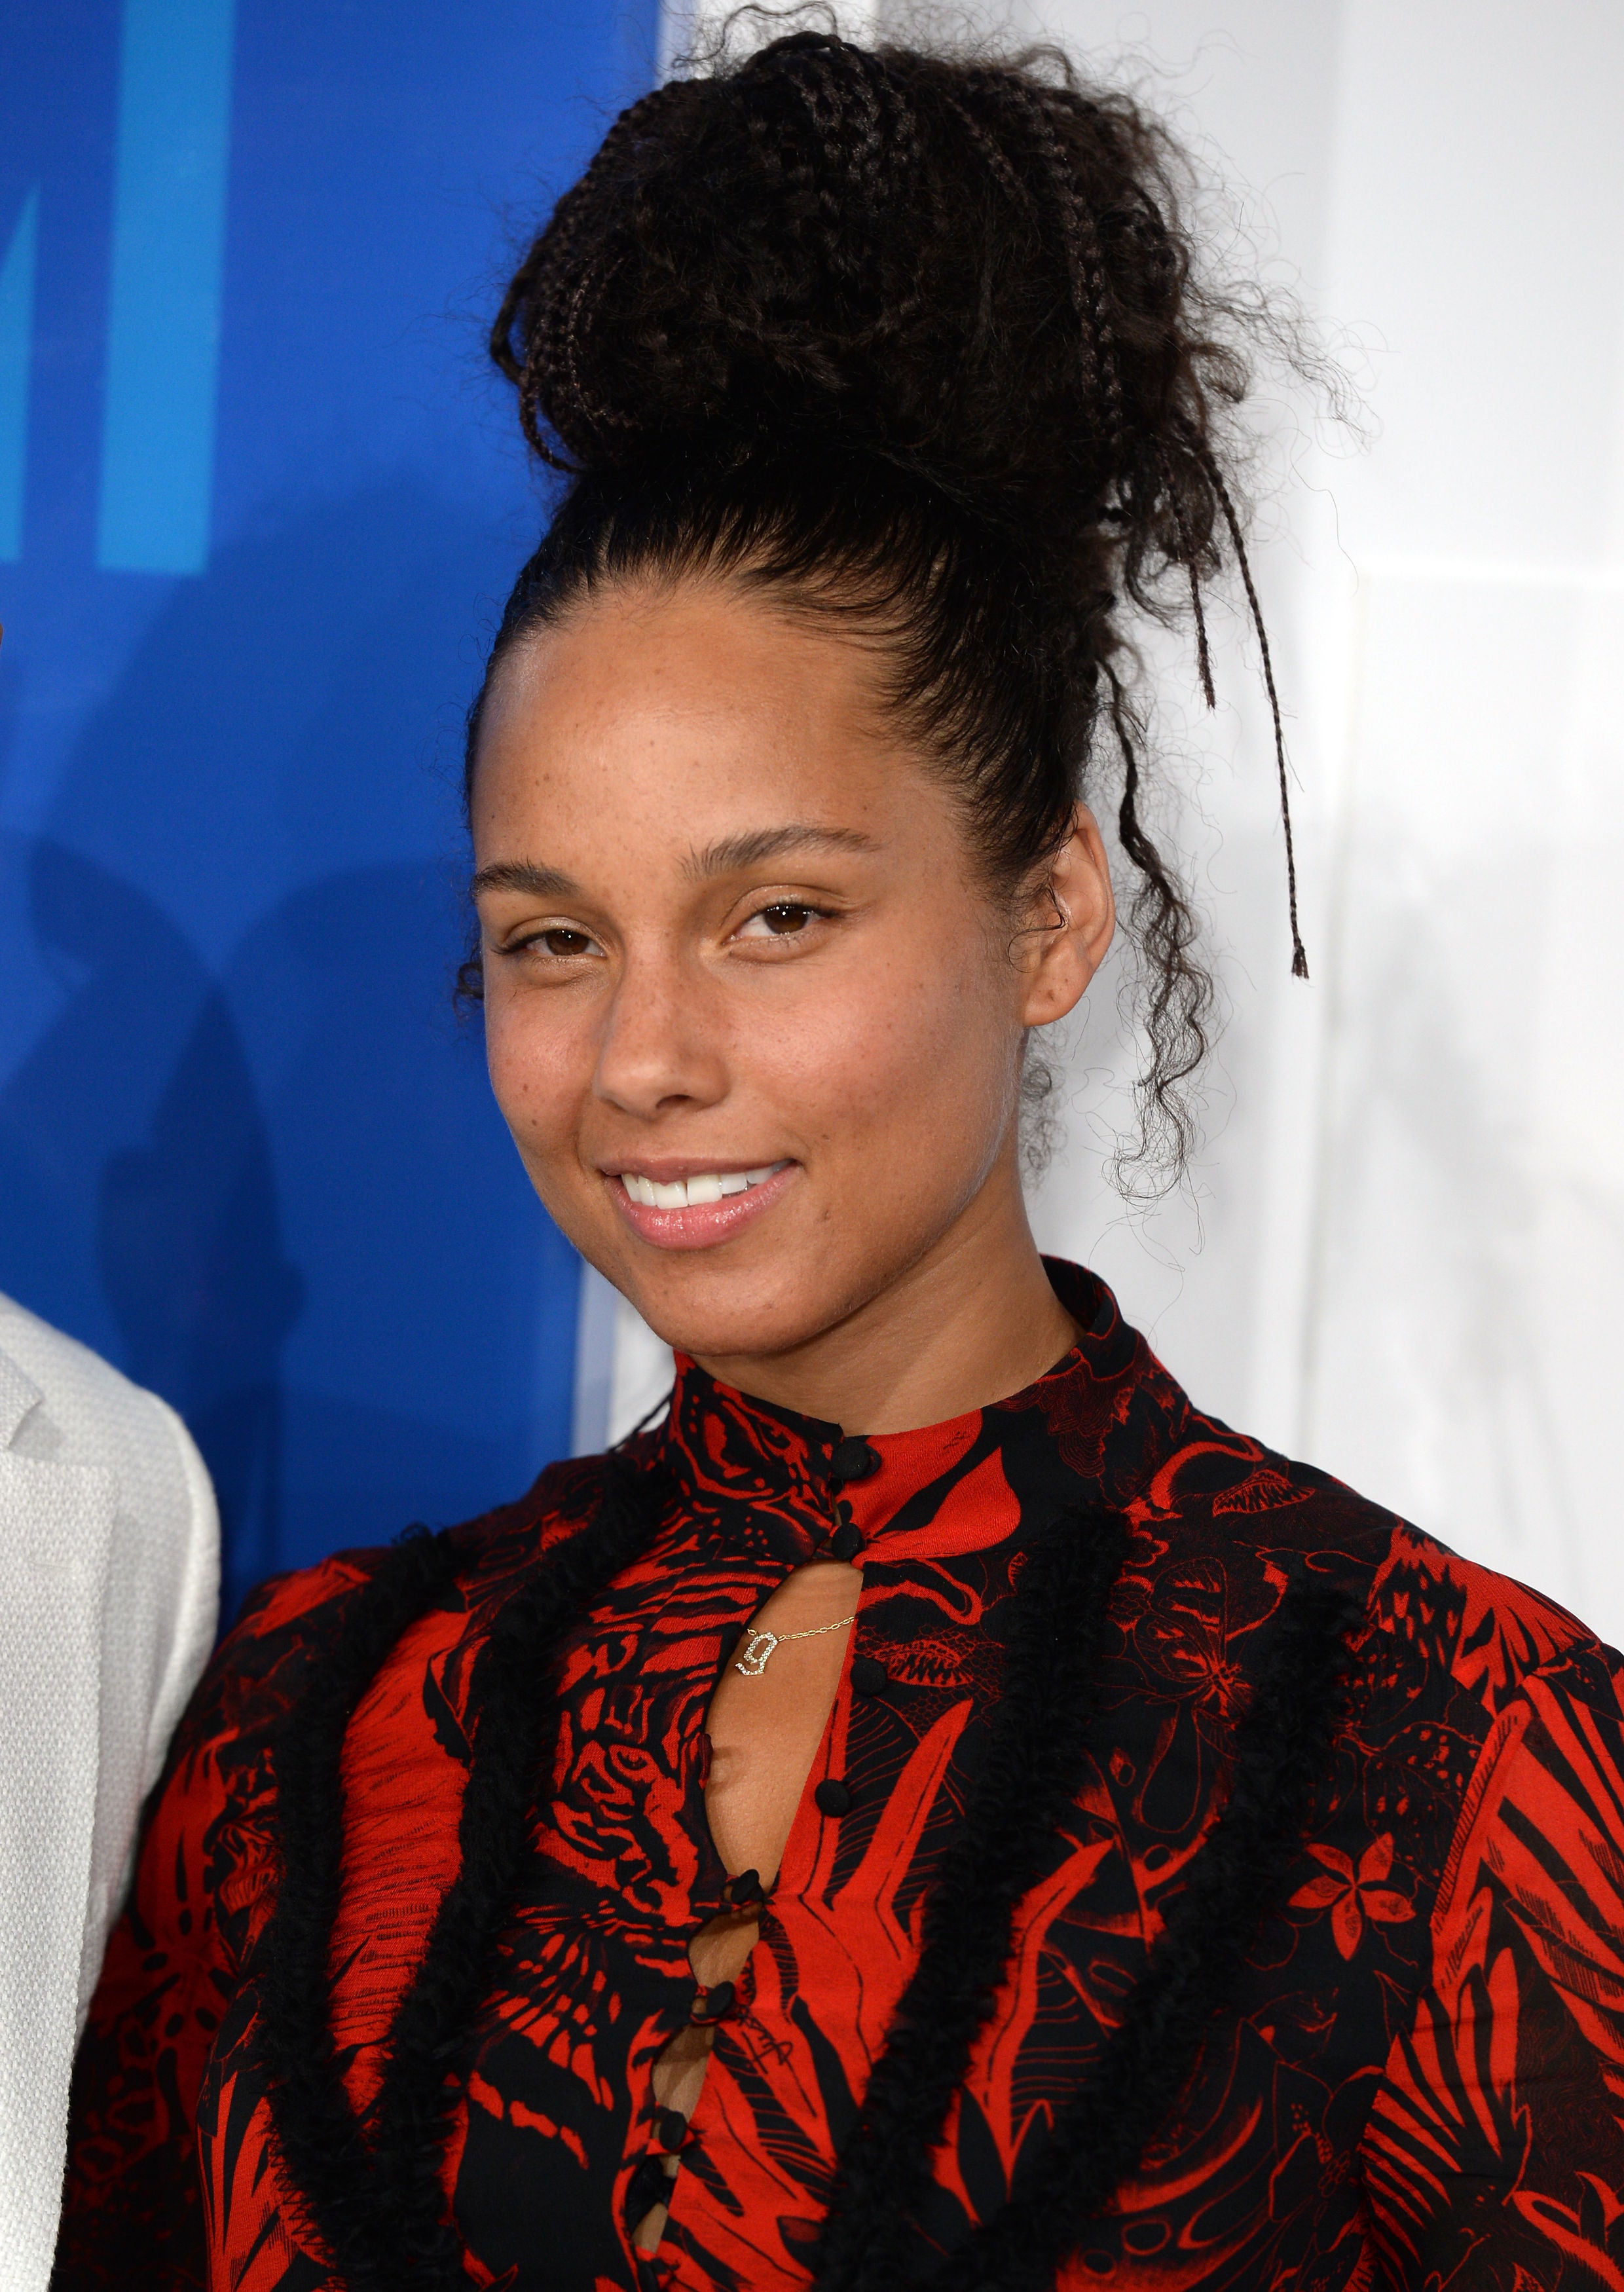 Alicia Keys' Hairstylist Shows You How To Recreate Her Braided Topknot